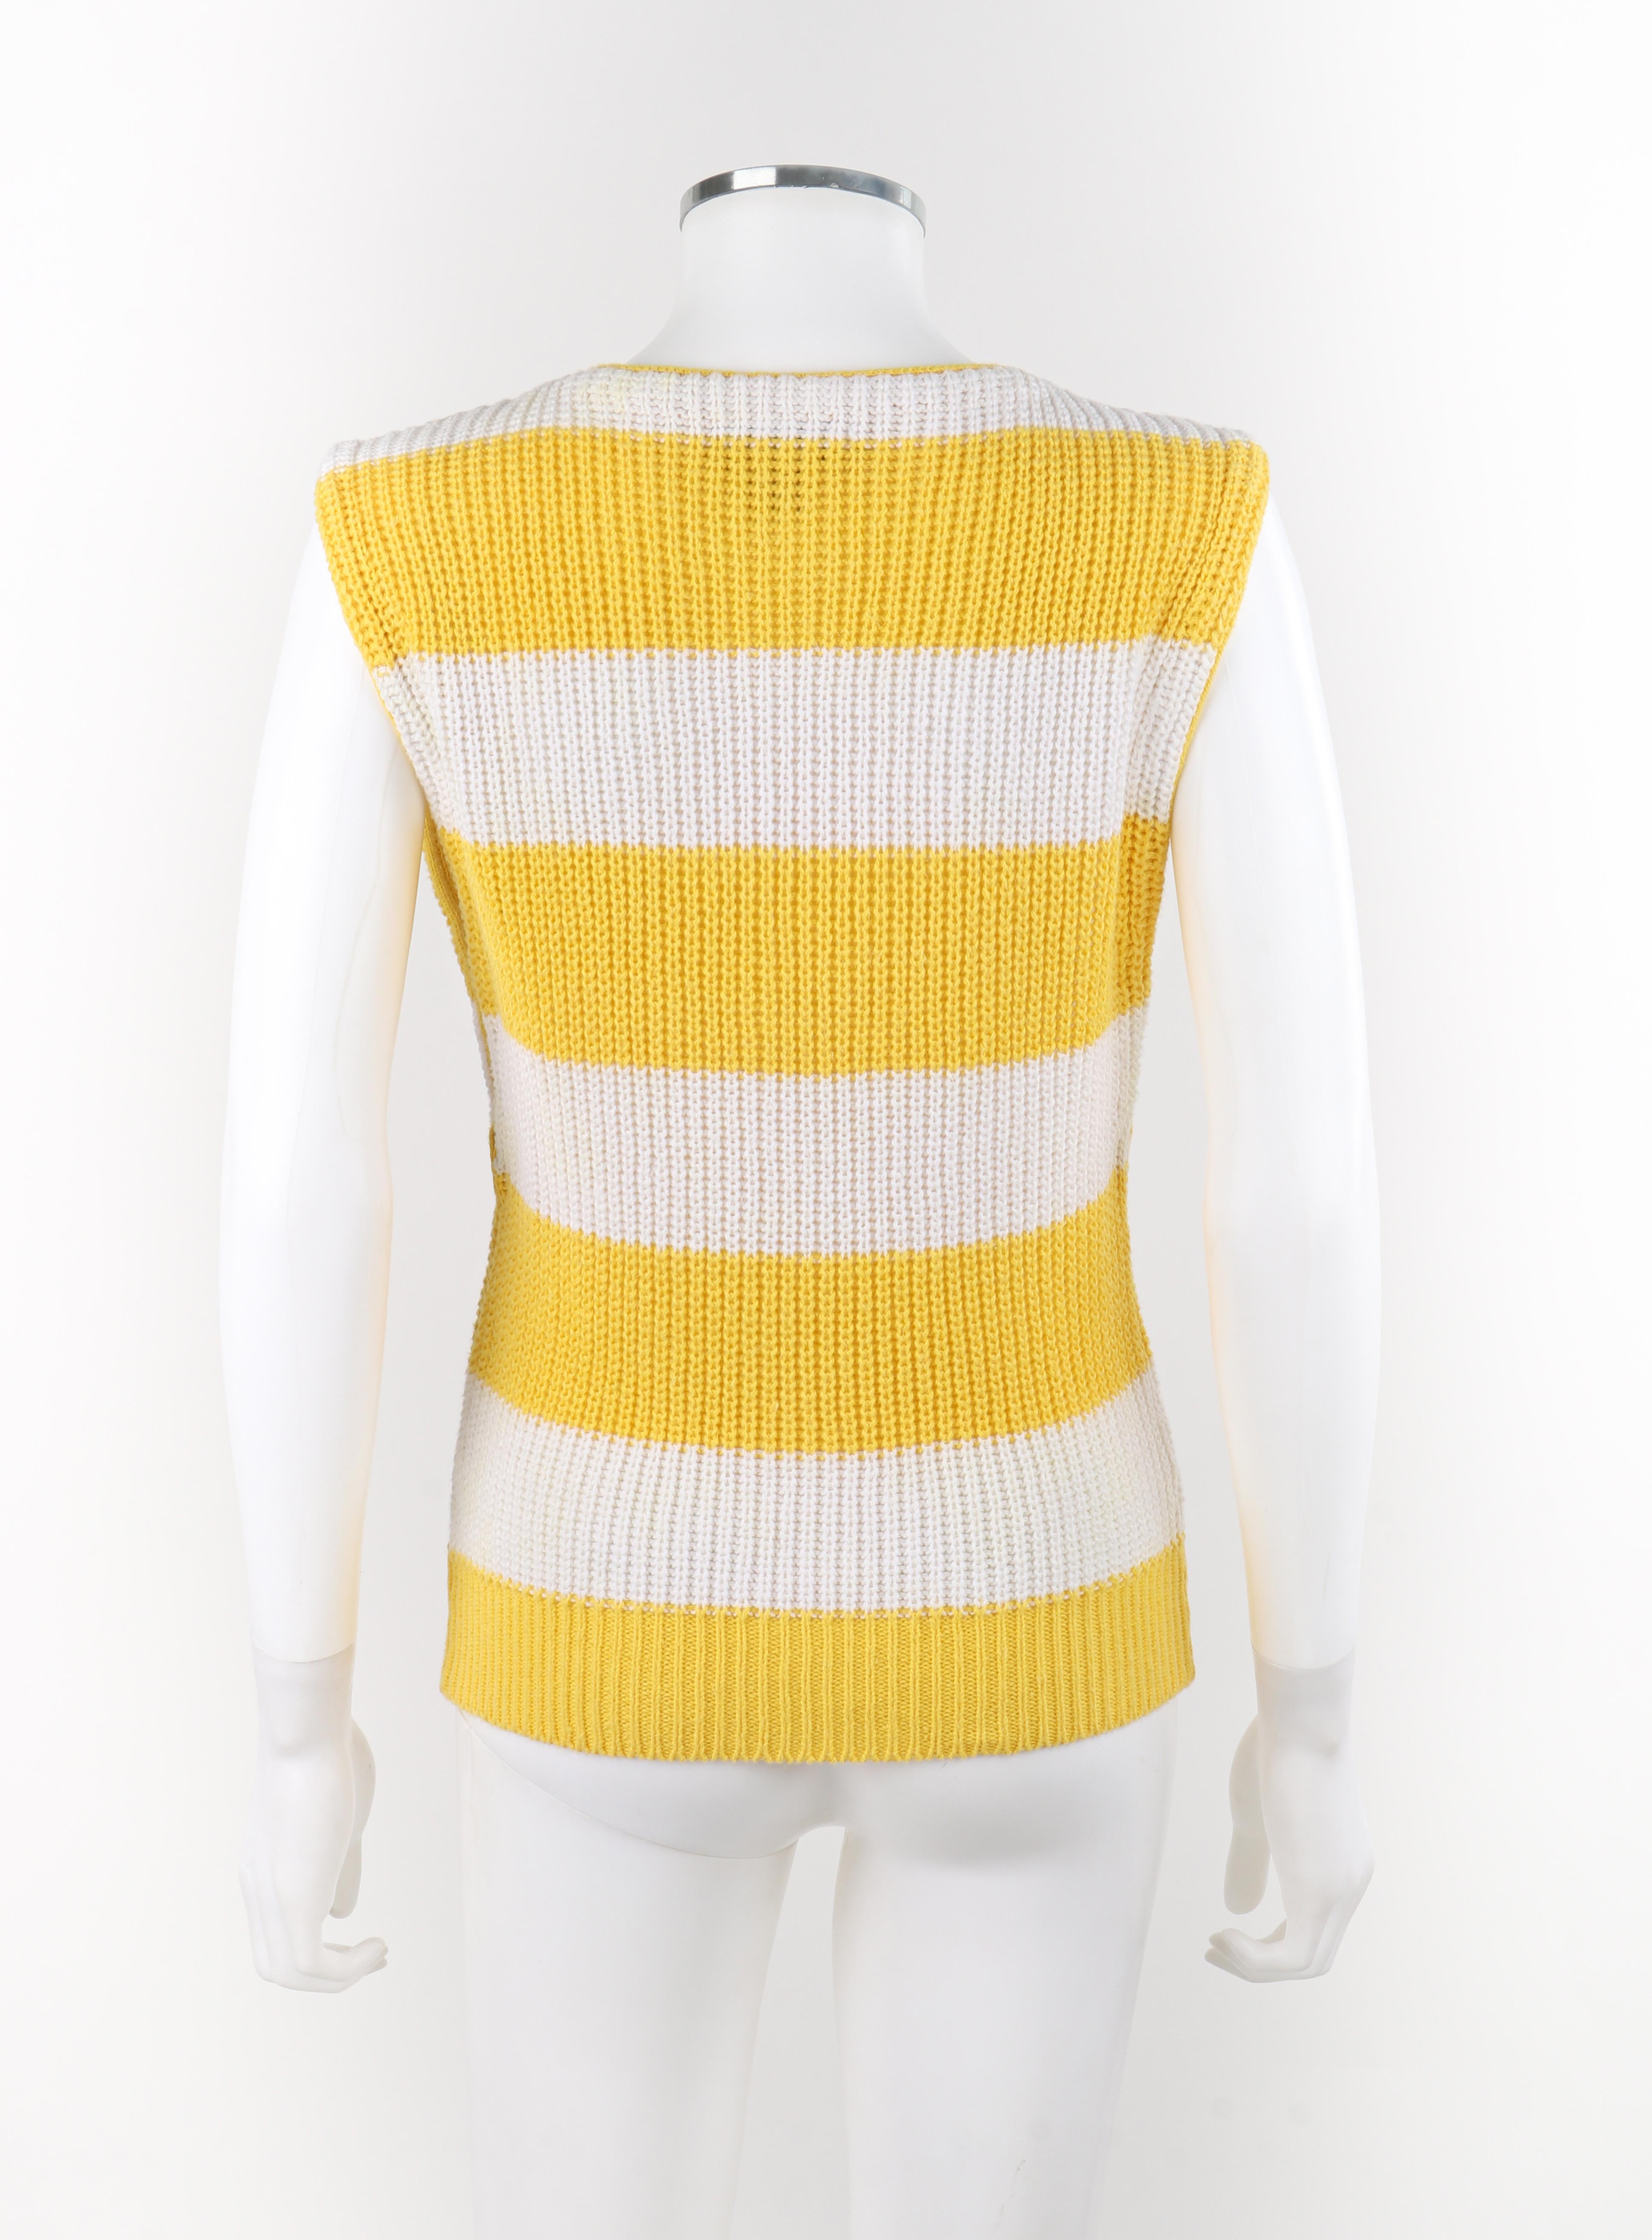 yellow and white striped sweater